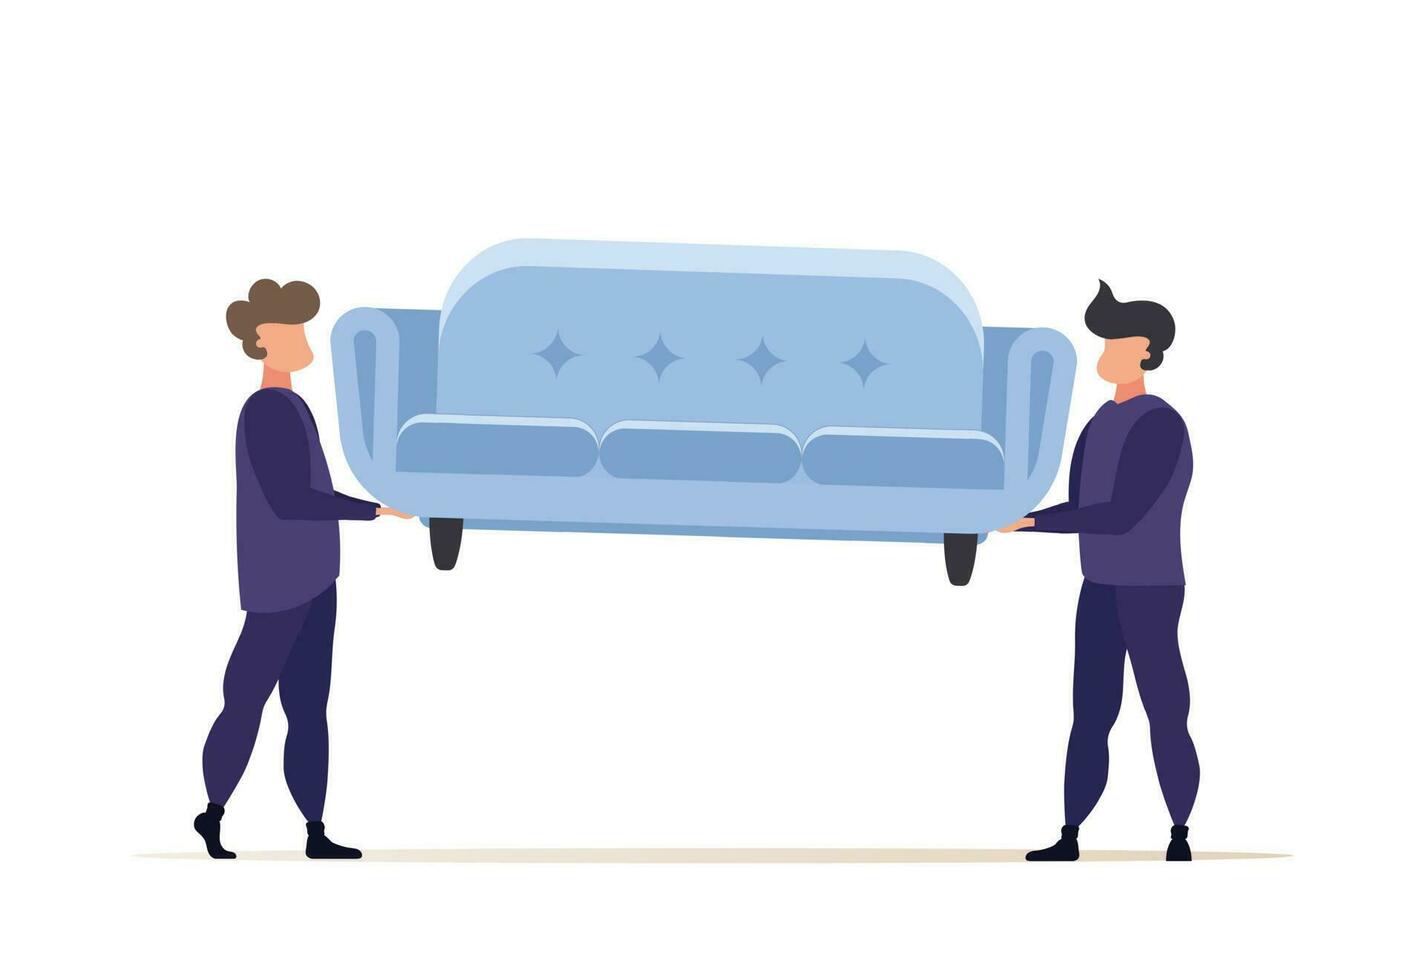 Movers or couriers carry a sofa. The concept of delivering parcels to home or moving house. Cartoon style. Vector illustration. Isolated.